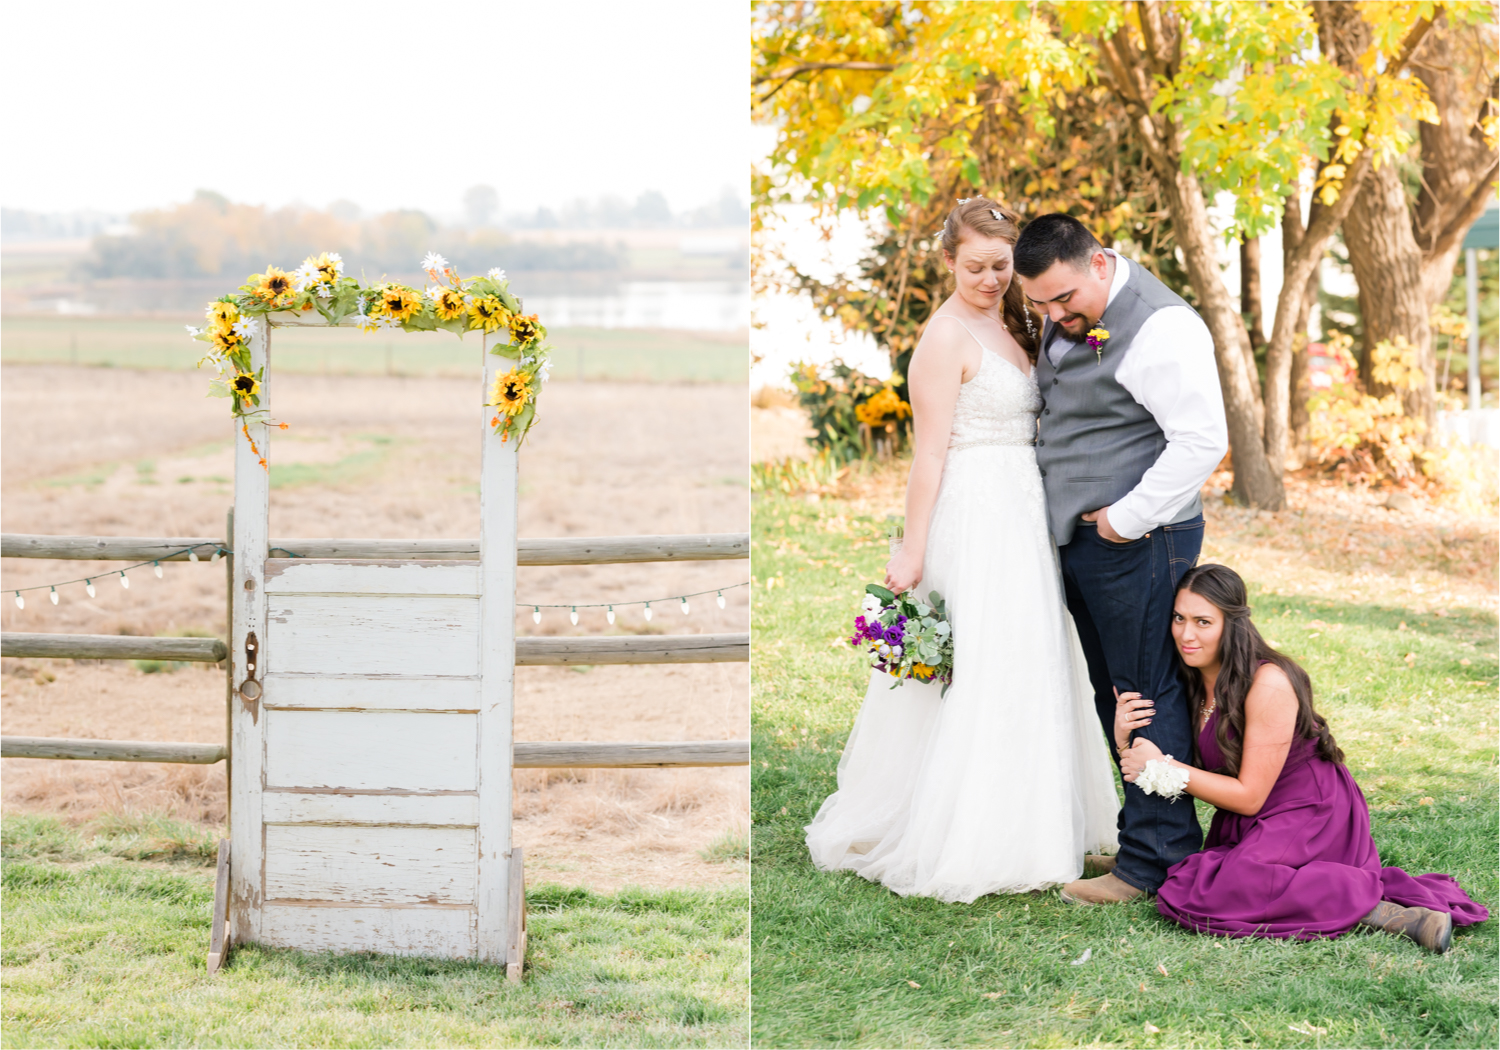 Rustic Fall Wedding at country home overlooking longs peak | Britni Girard Photography | Colorado Wedding Photography and Videography team | Fall colors, country fences leading to mountain views | Relaxed DIY wedding with elegant charm | Florals by Tahnee Wydra | Brides Dress from Abeille Bridal | Best Event Rentals